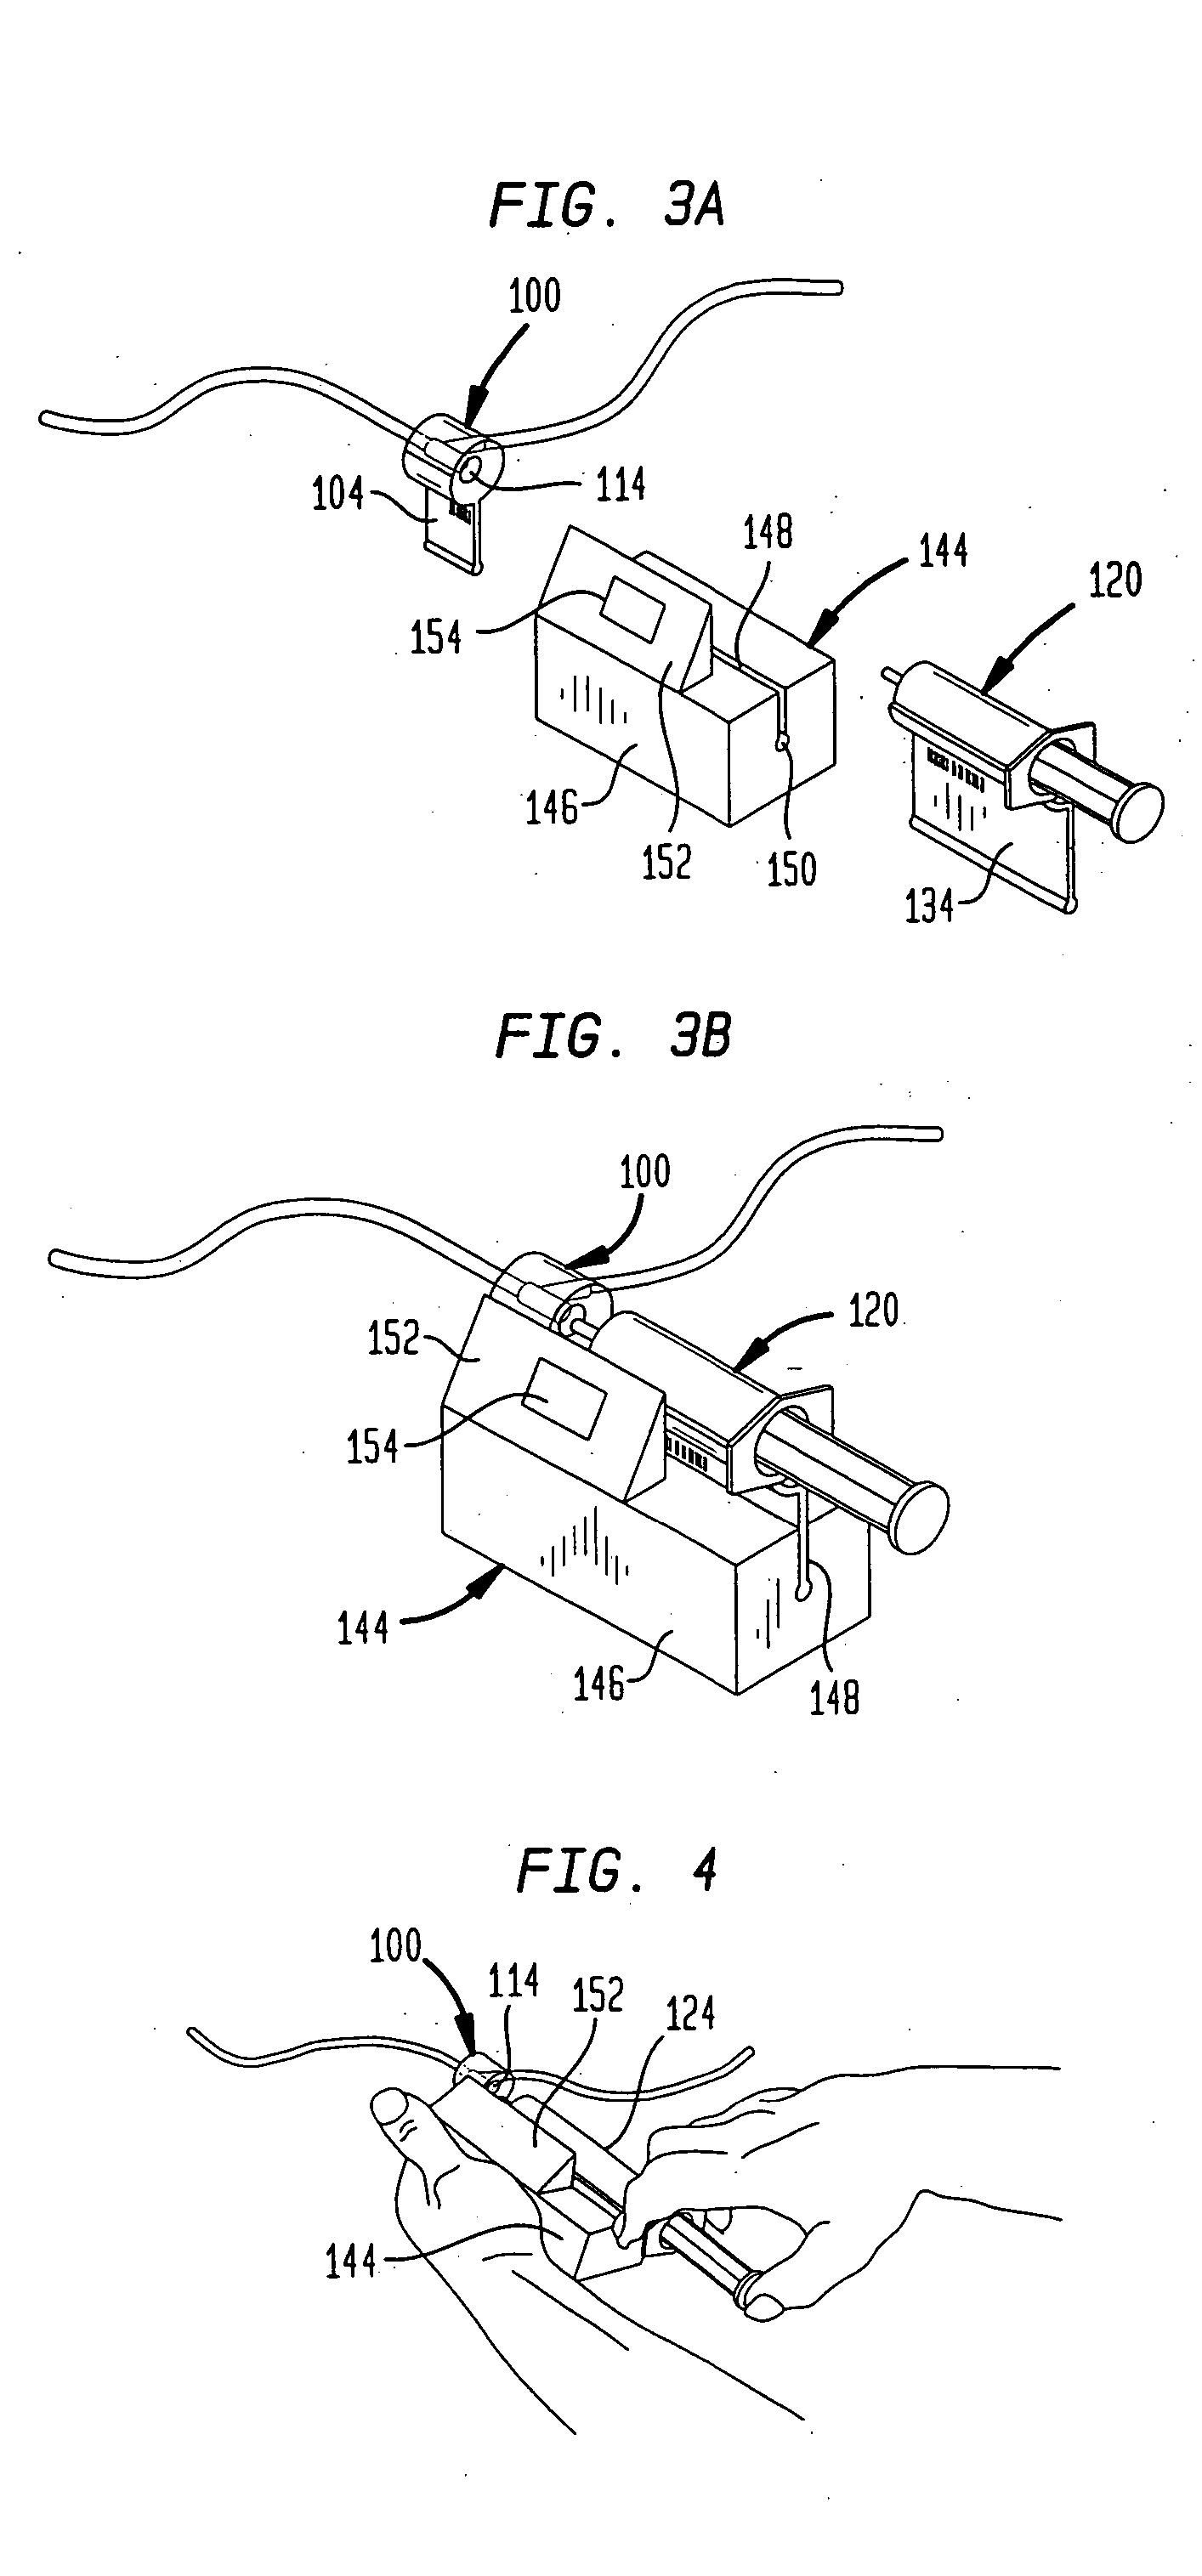 Drug delivery and monitoring system